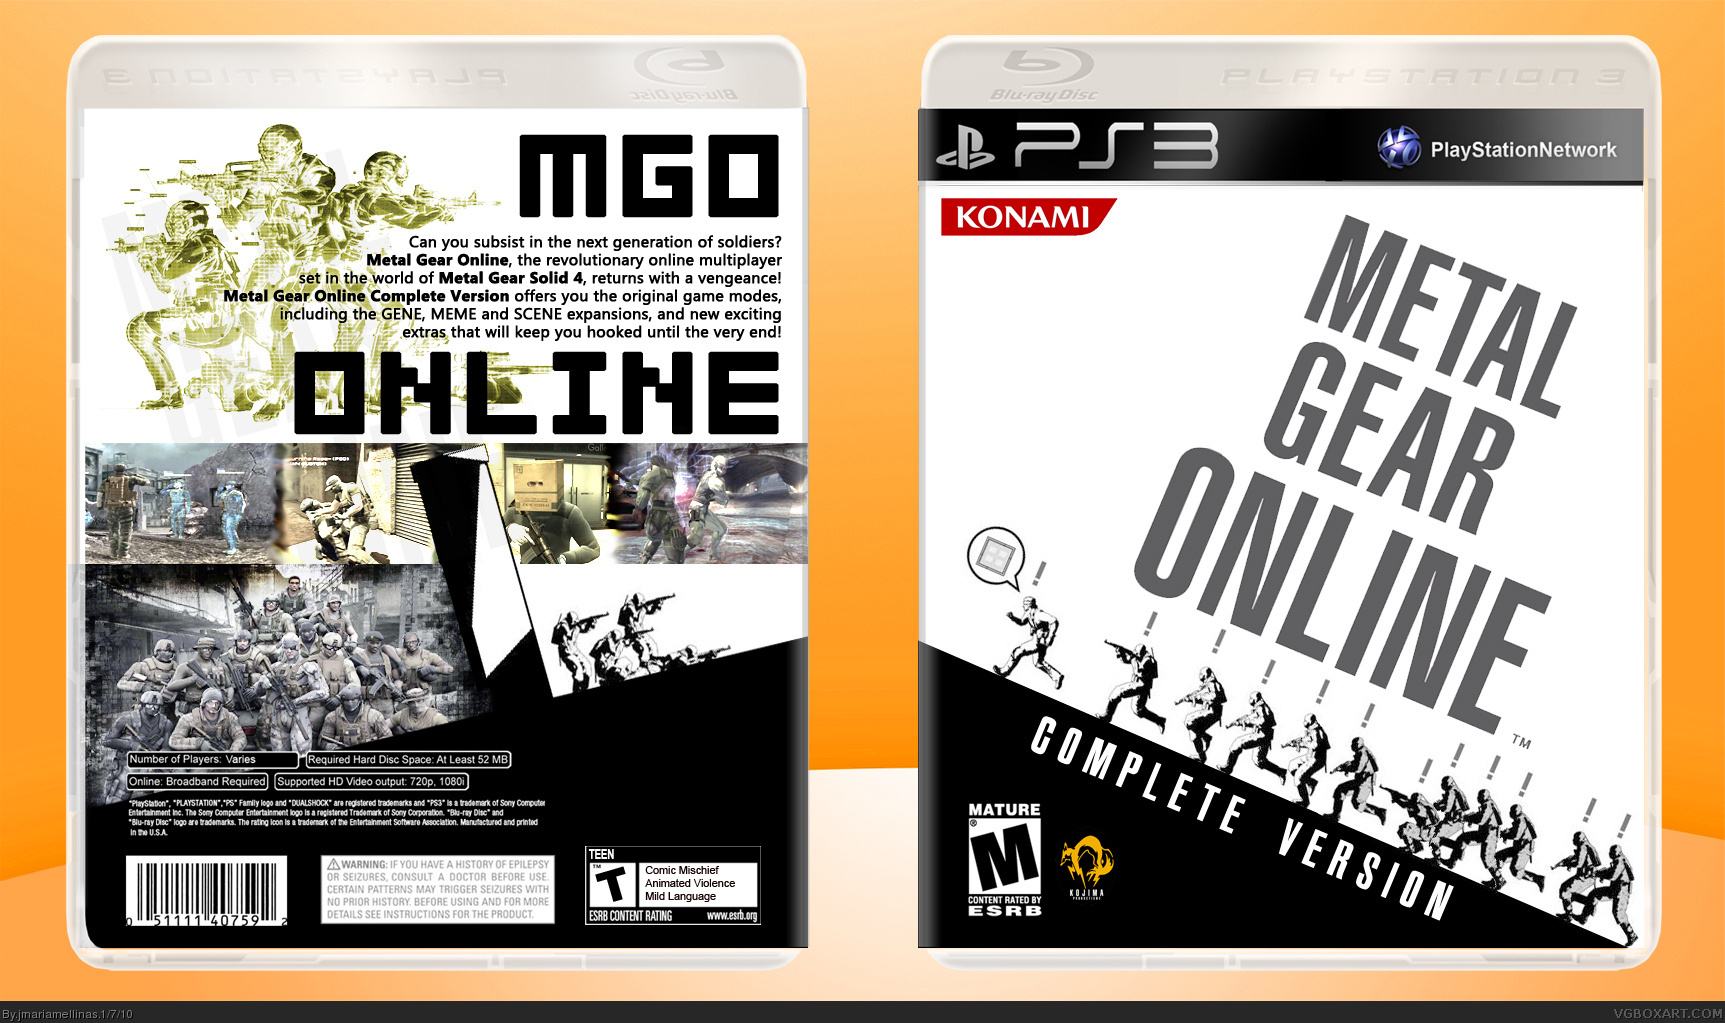 Metal Gear Online Complete Version box cover